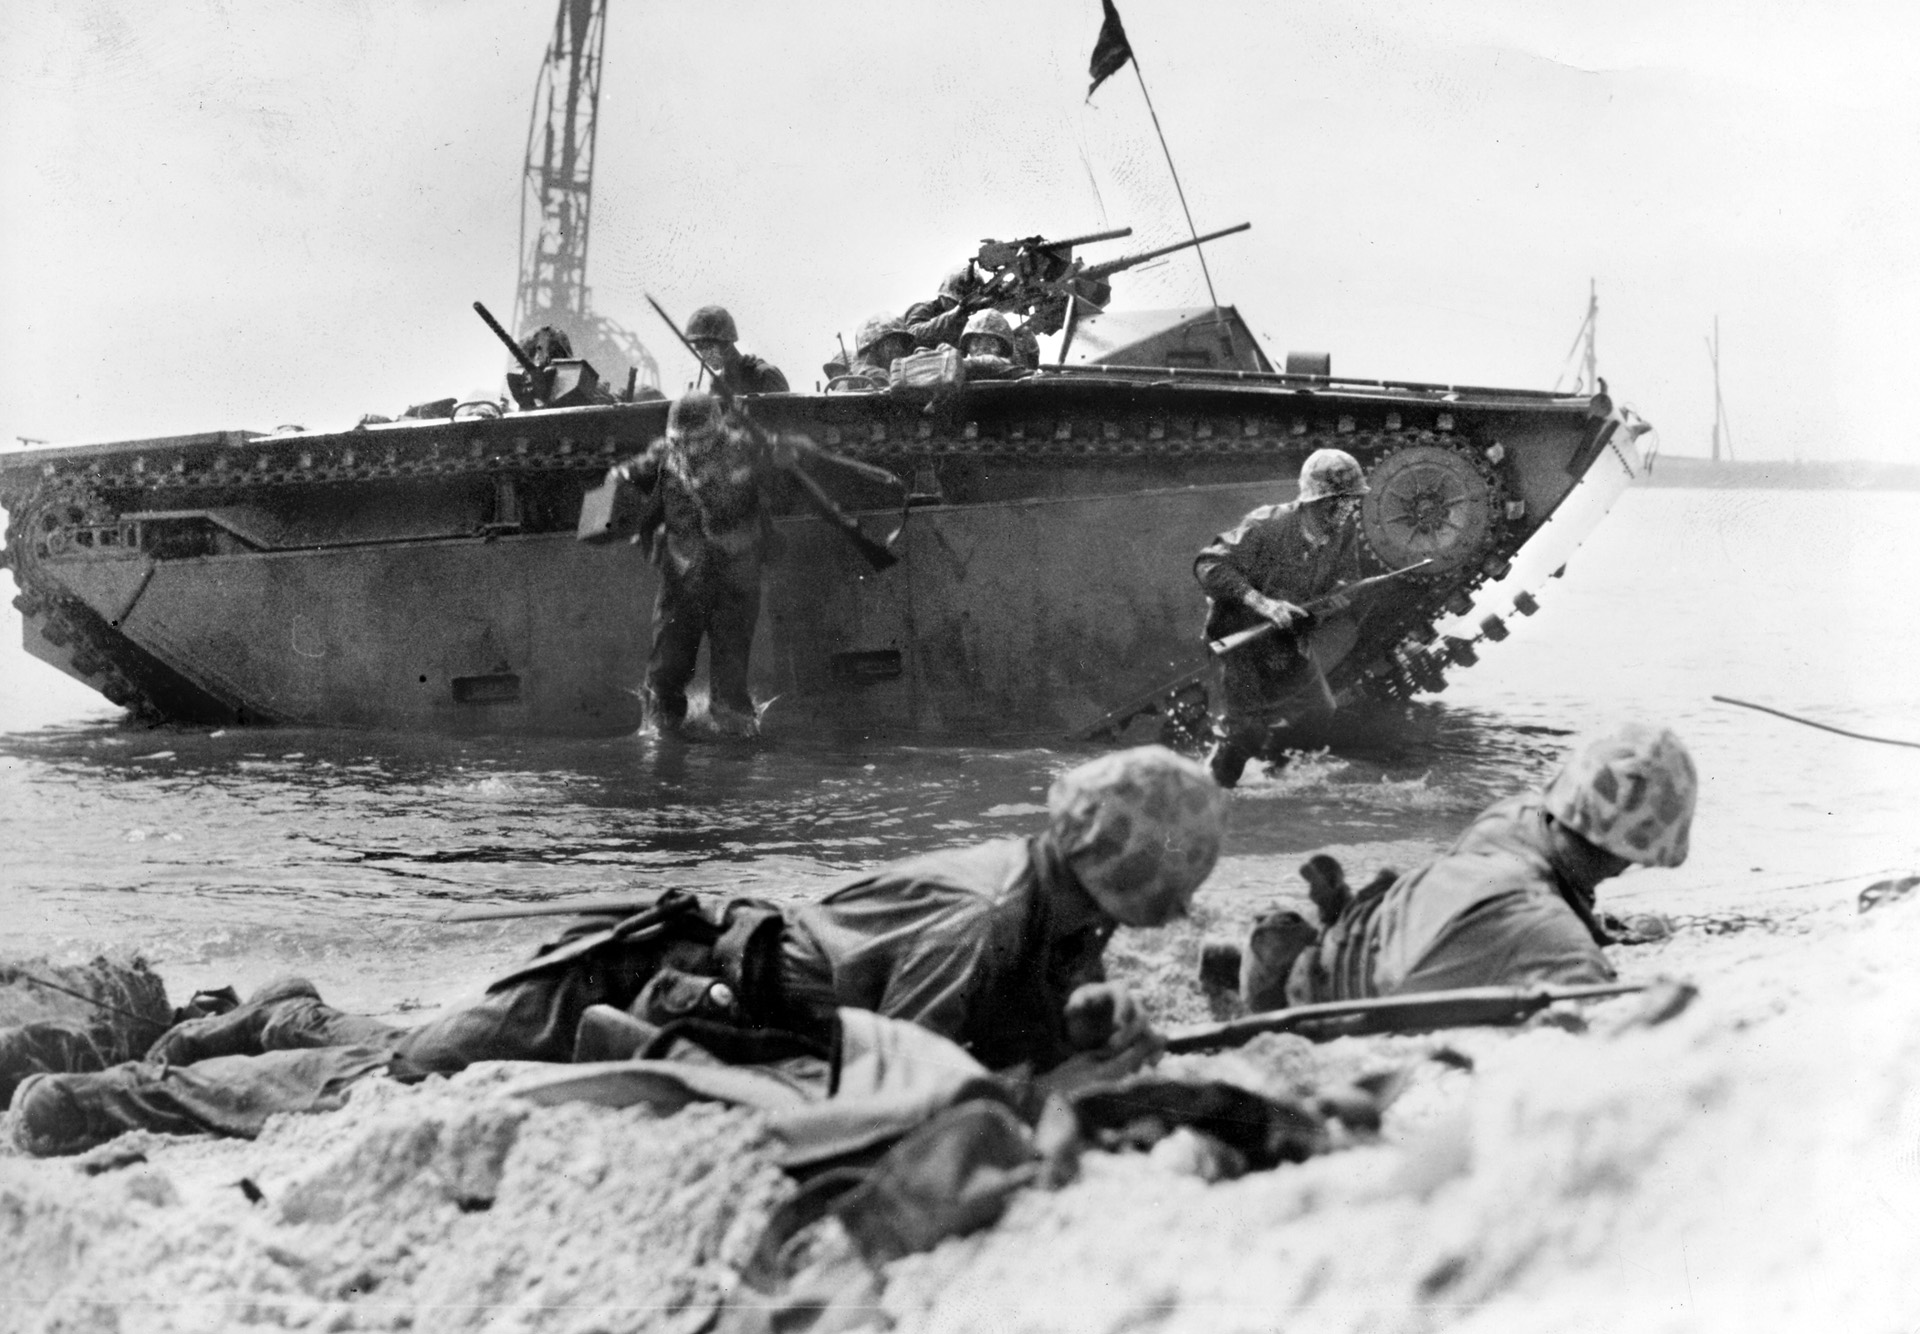 Marines leap over the side of their amphibious Amtrac landing craft during operations in the Marshall Islands. Instead of attacking the strong defenses of islands in the outer Marshalls, the Marines struck at Roi-Namur while veteran Army troops attacked Kwajalein.